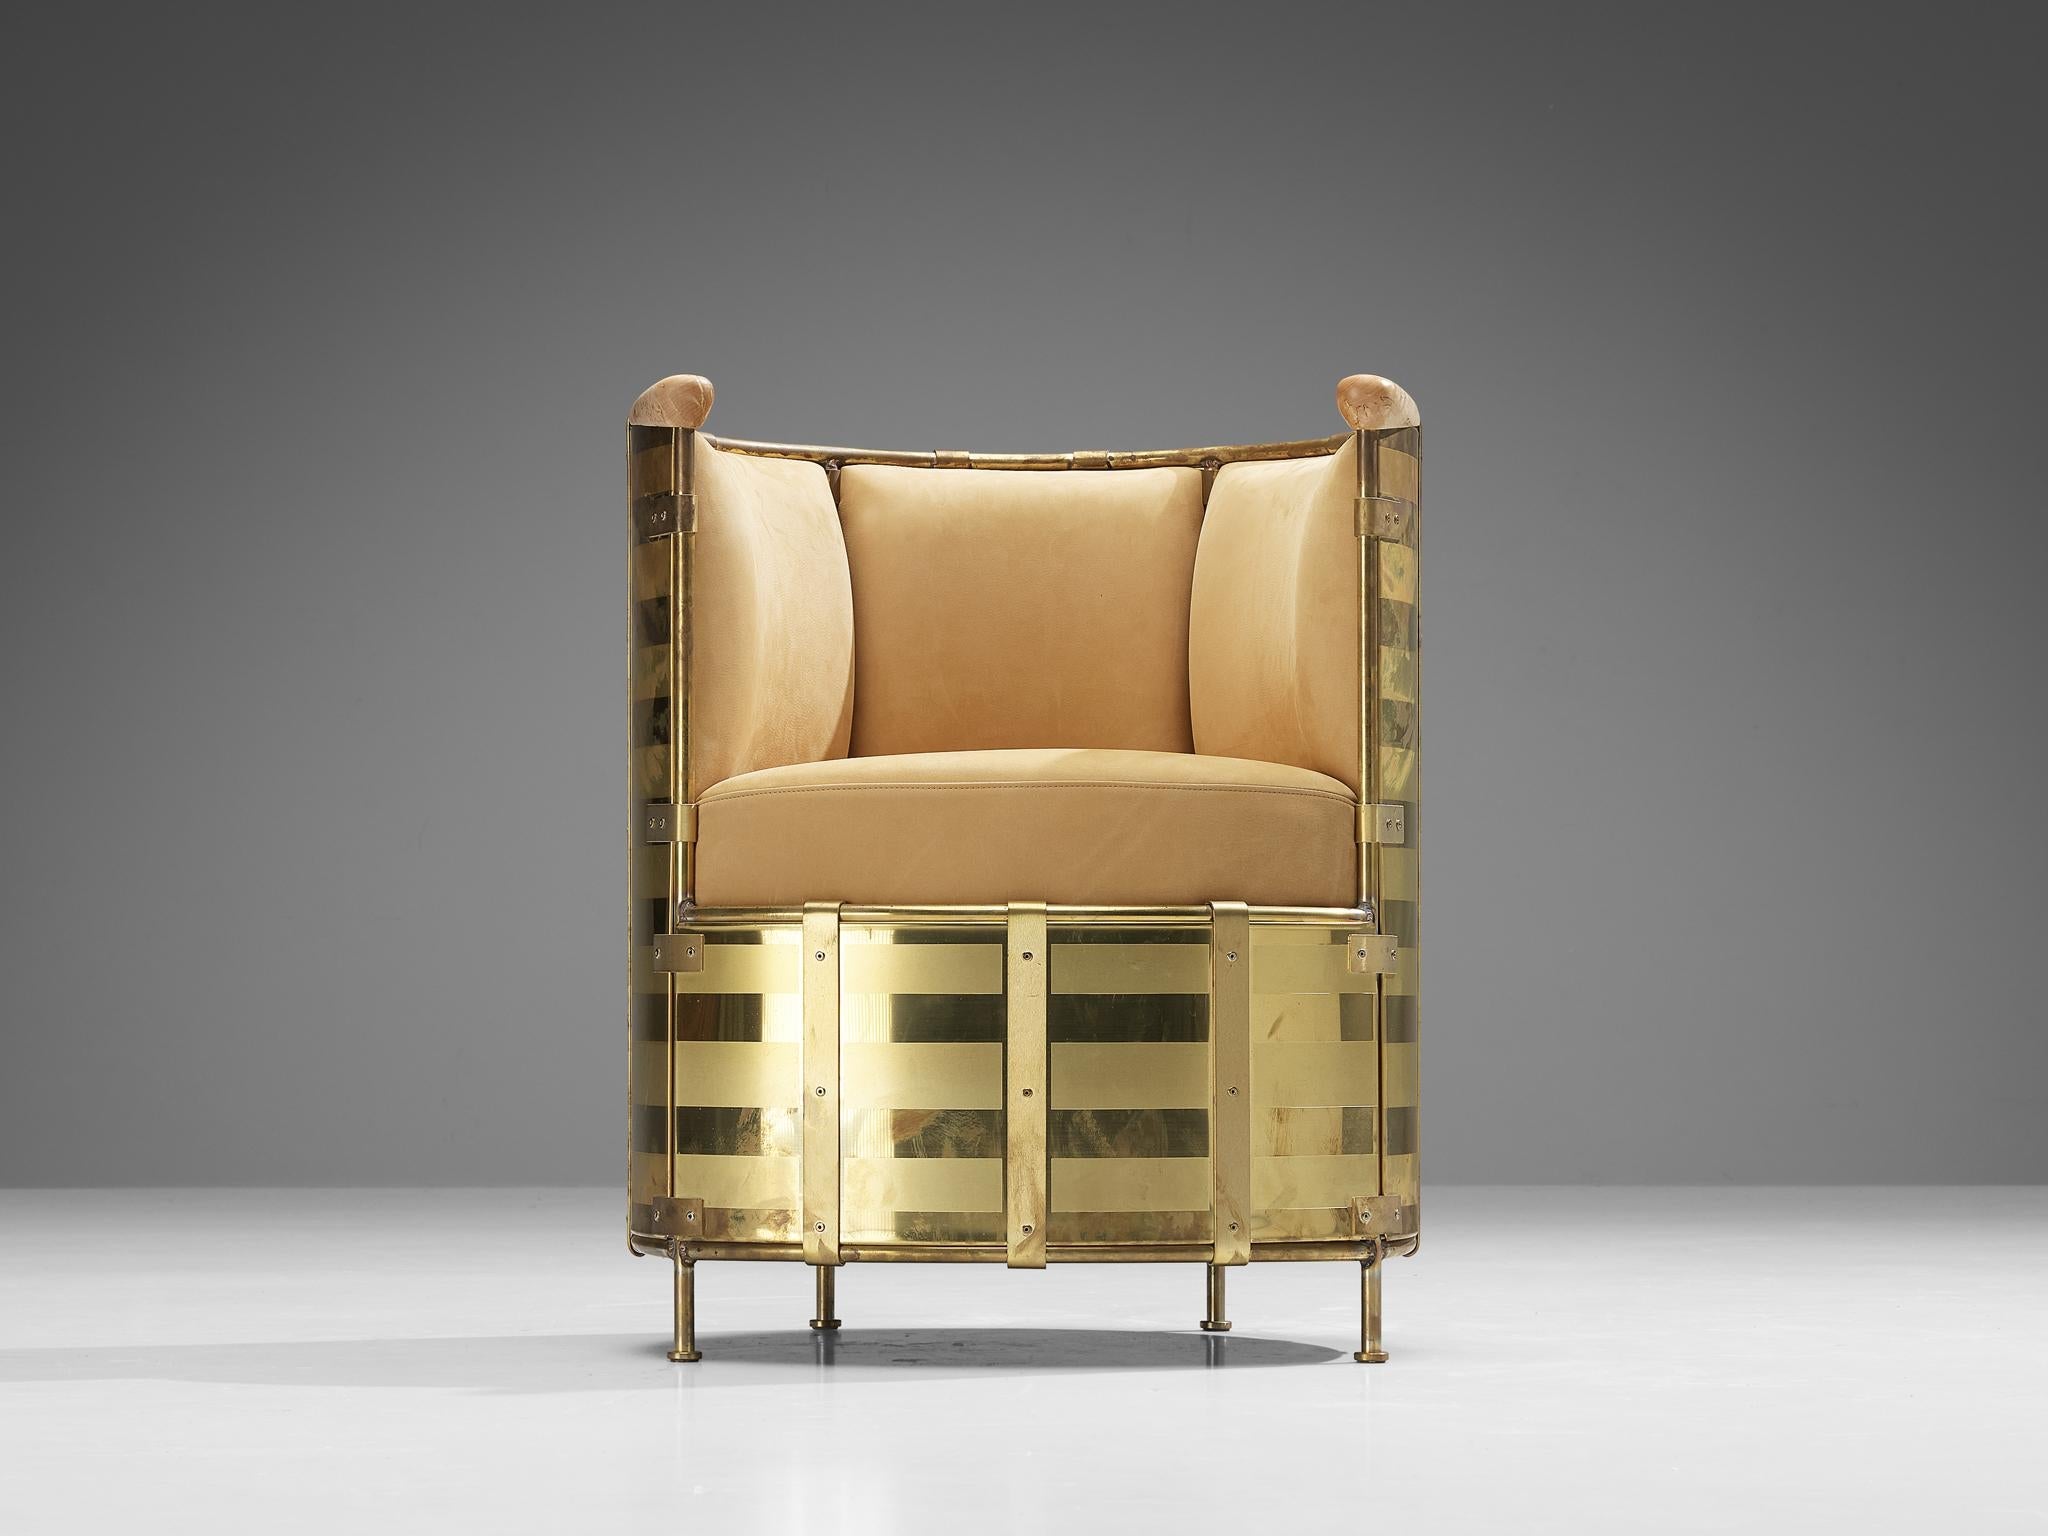 Mats Theselius for Källemo AB Limited Edition Lounge Chairs 'El Dorado'